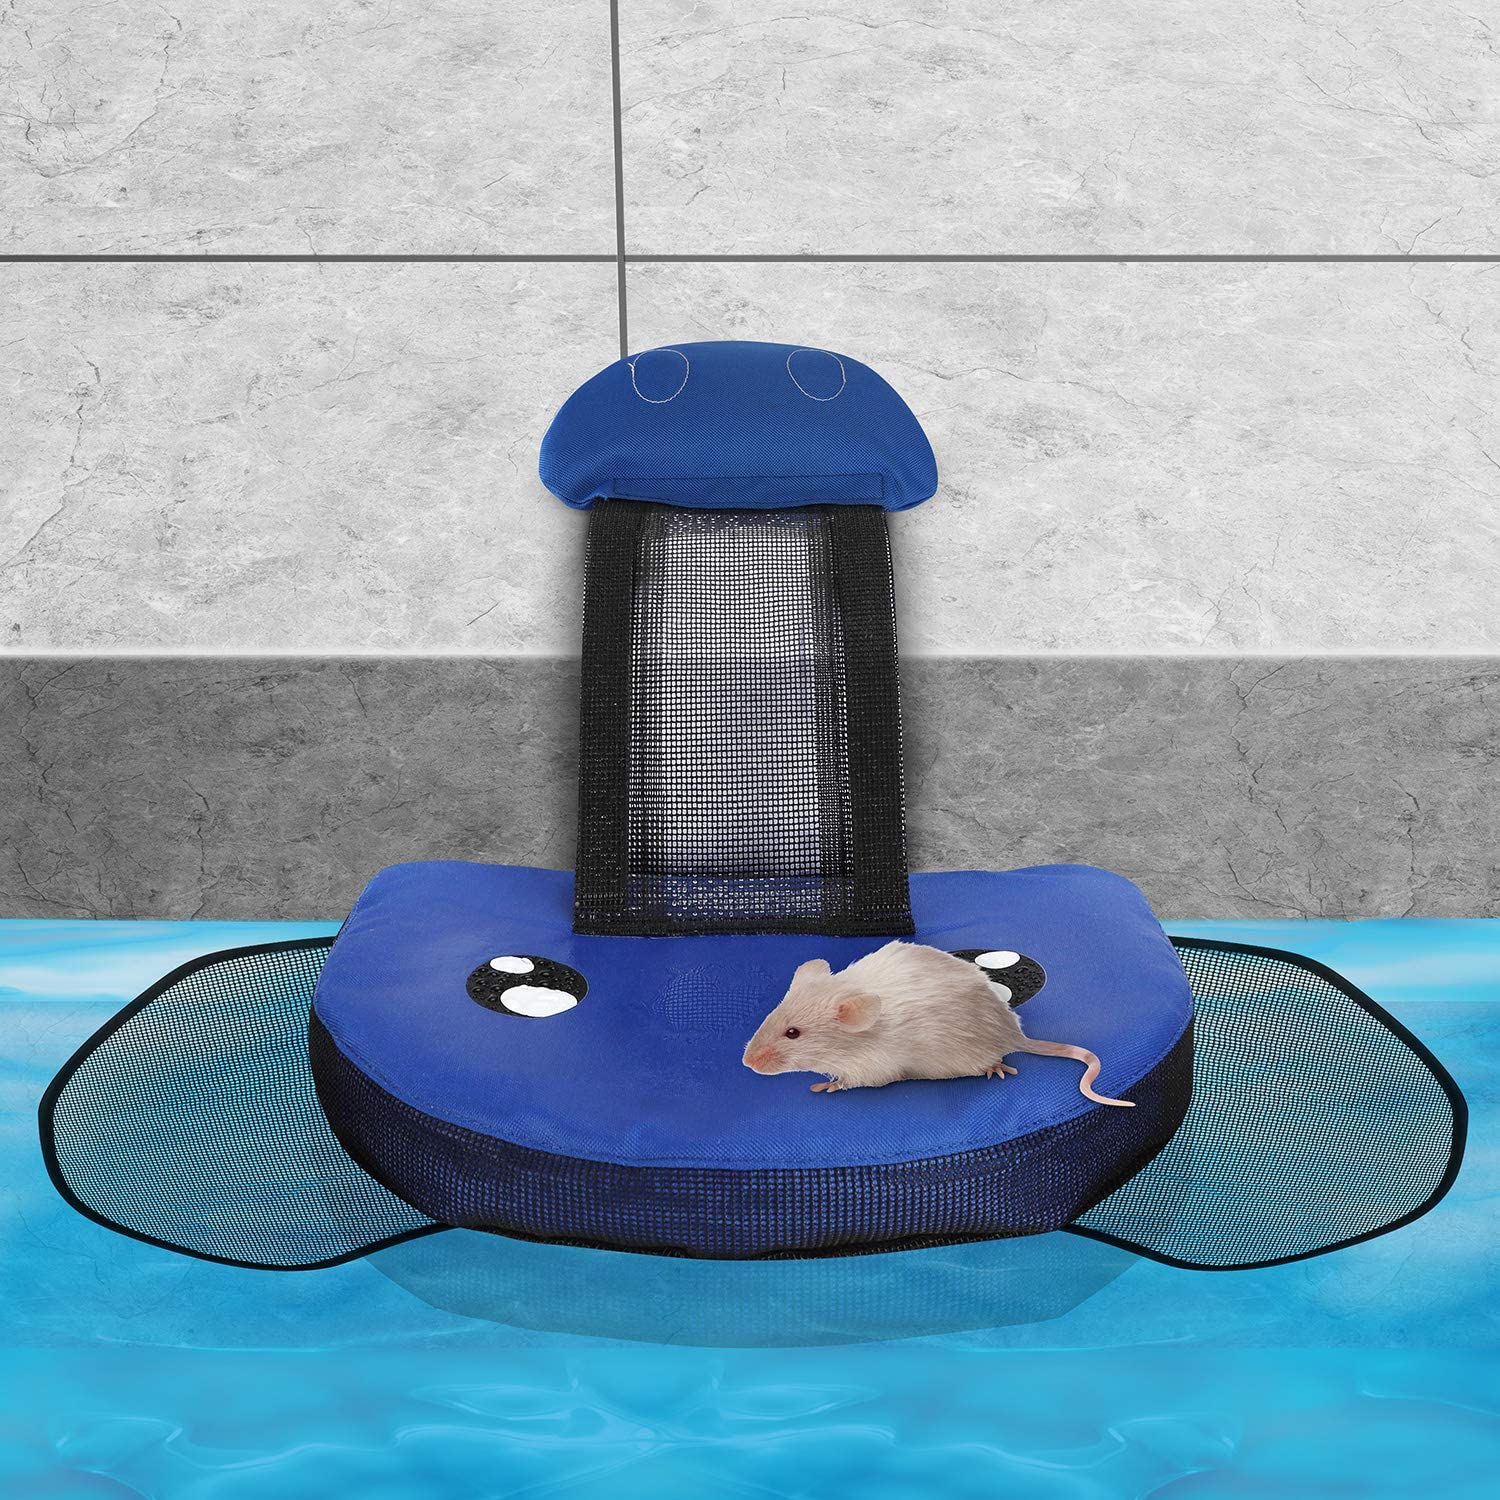 Elephant Shaped Pool Ramp Helps Frogs, Mice, and Other Critters Out Of Your Pool - Critter exit pool ramp